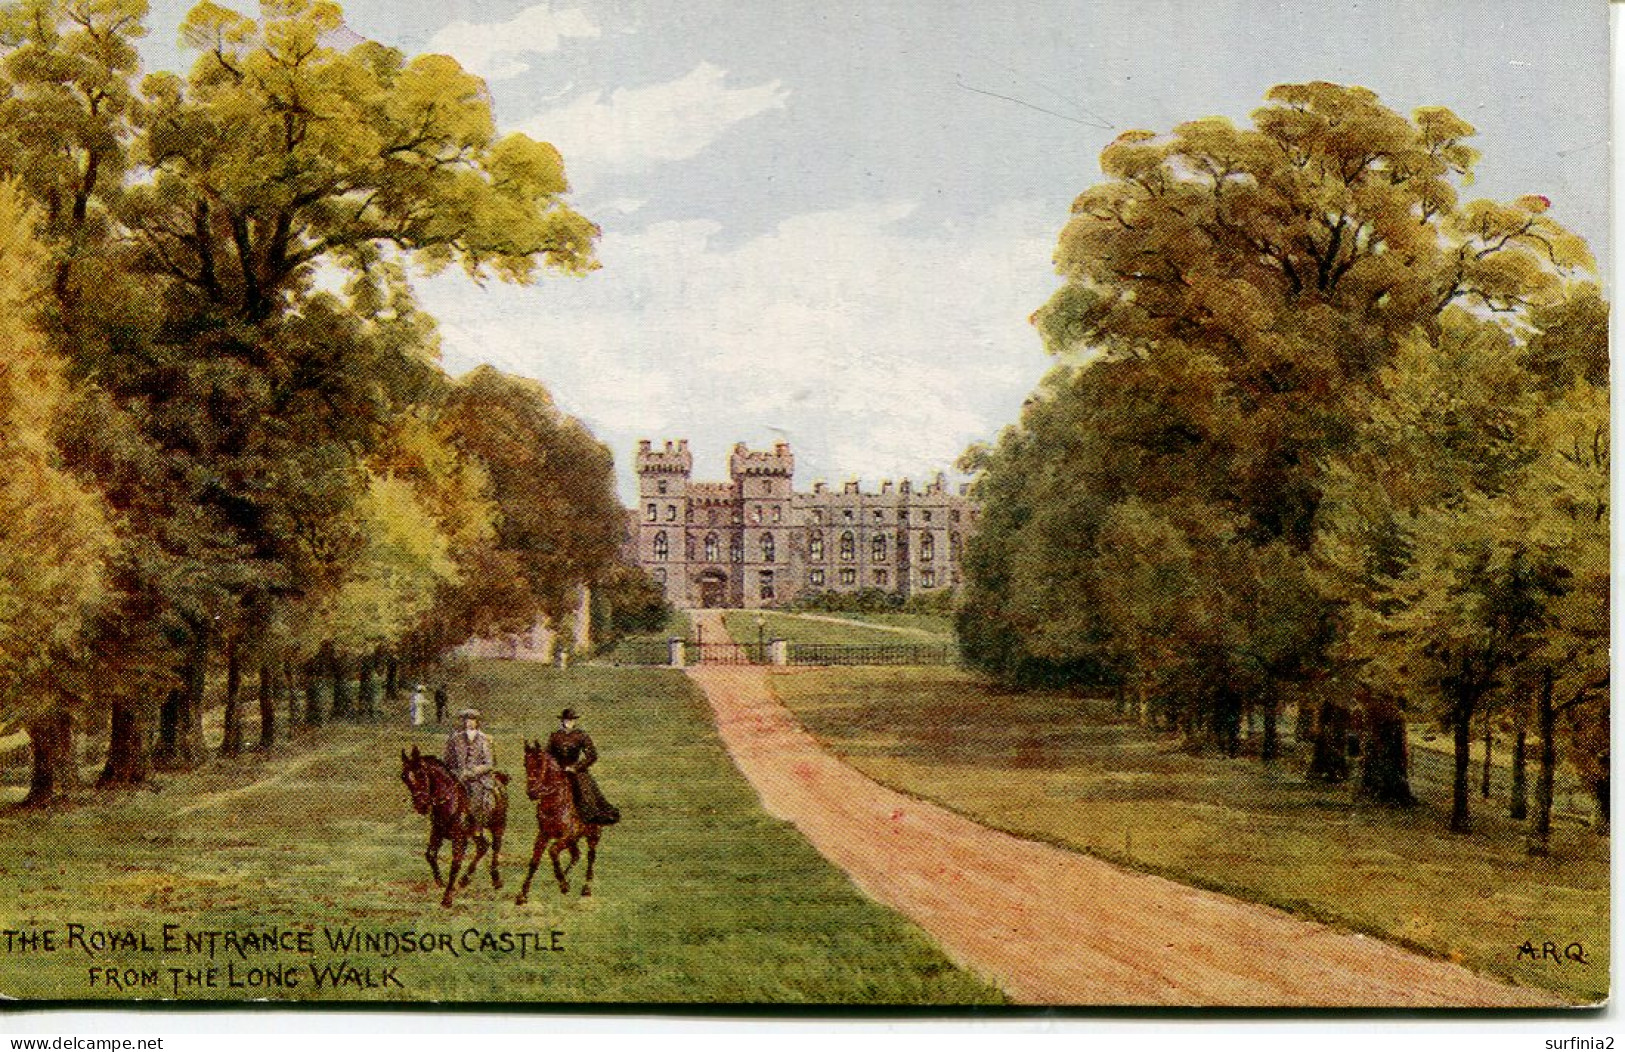 A R QUINTON - SALMON 1181 - THE ROYAL ENTRANCE And WINDSOR CASTLE FROM THE LONG WALK - Quinton, AR